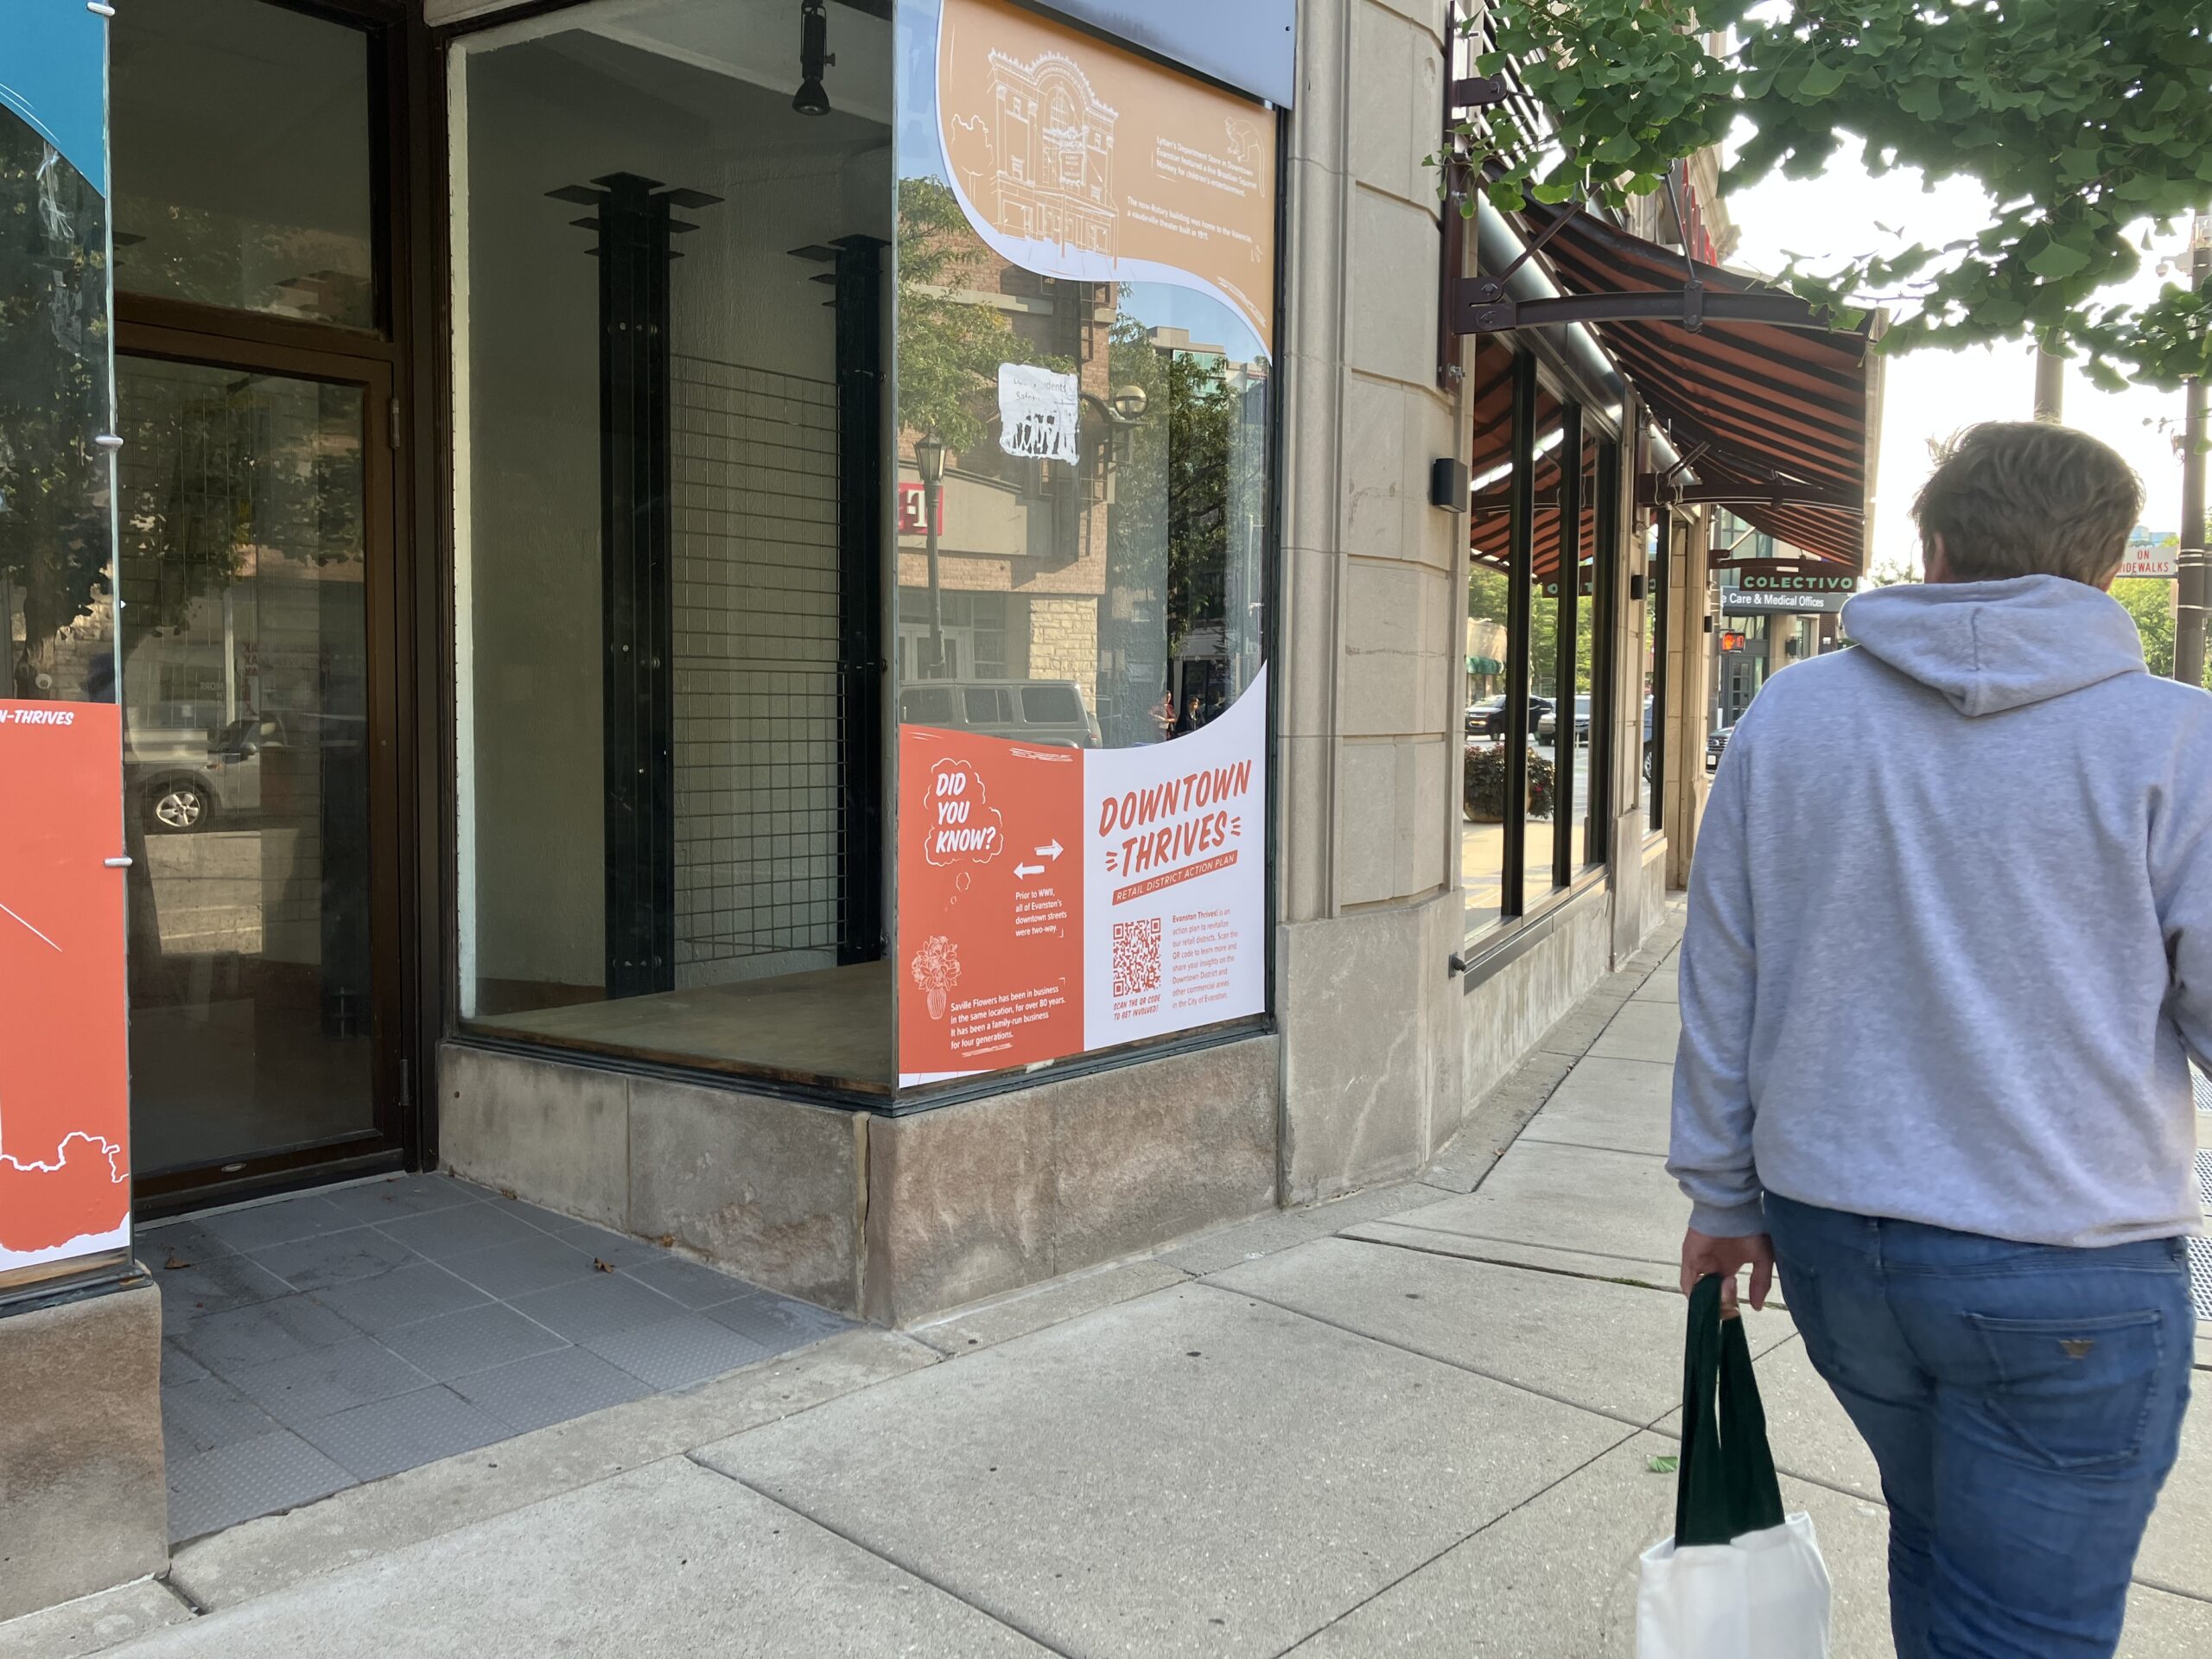 Evanston turns to an outside clean team to tidy up notably ‘dirtier” business districts